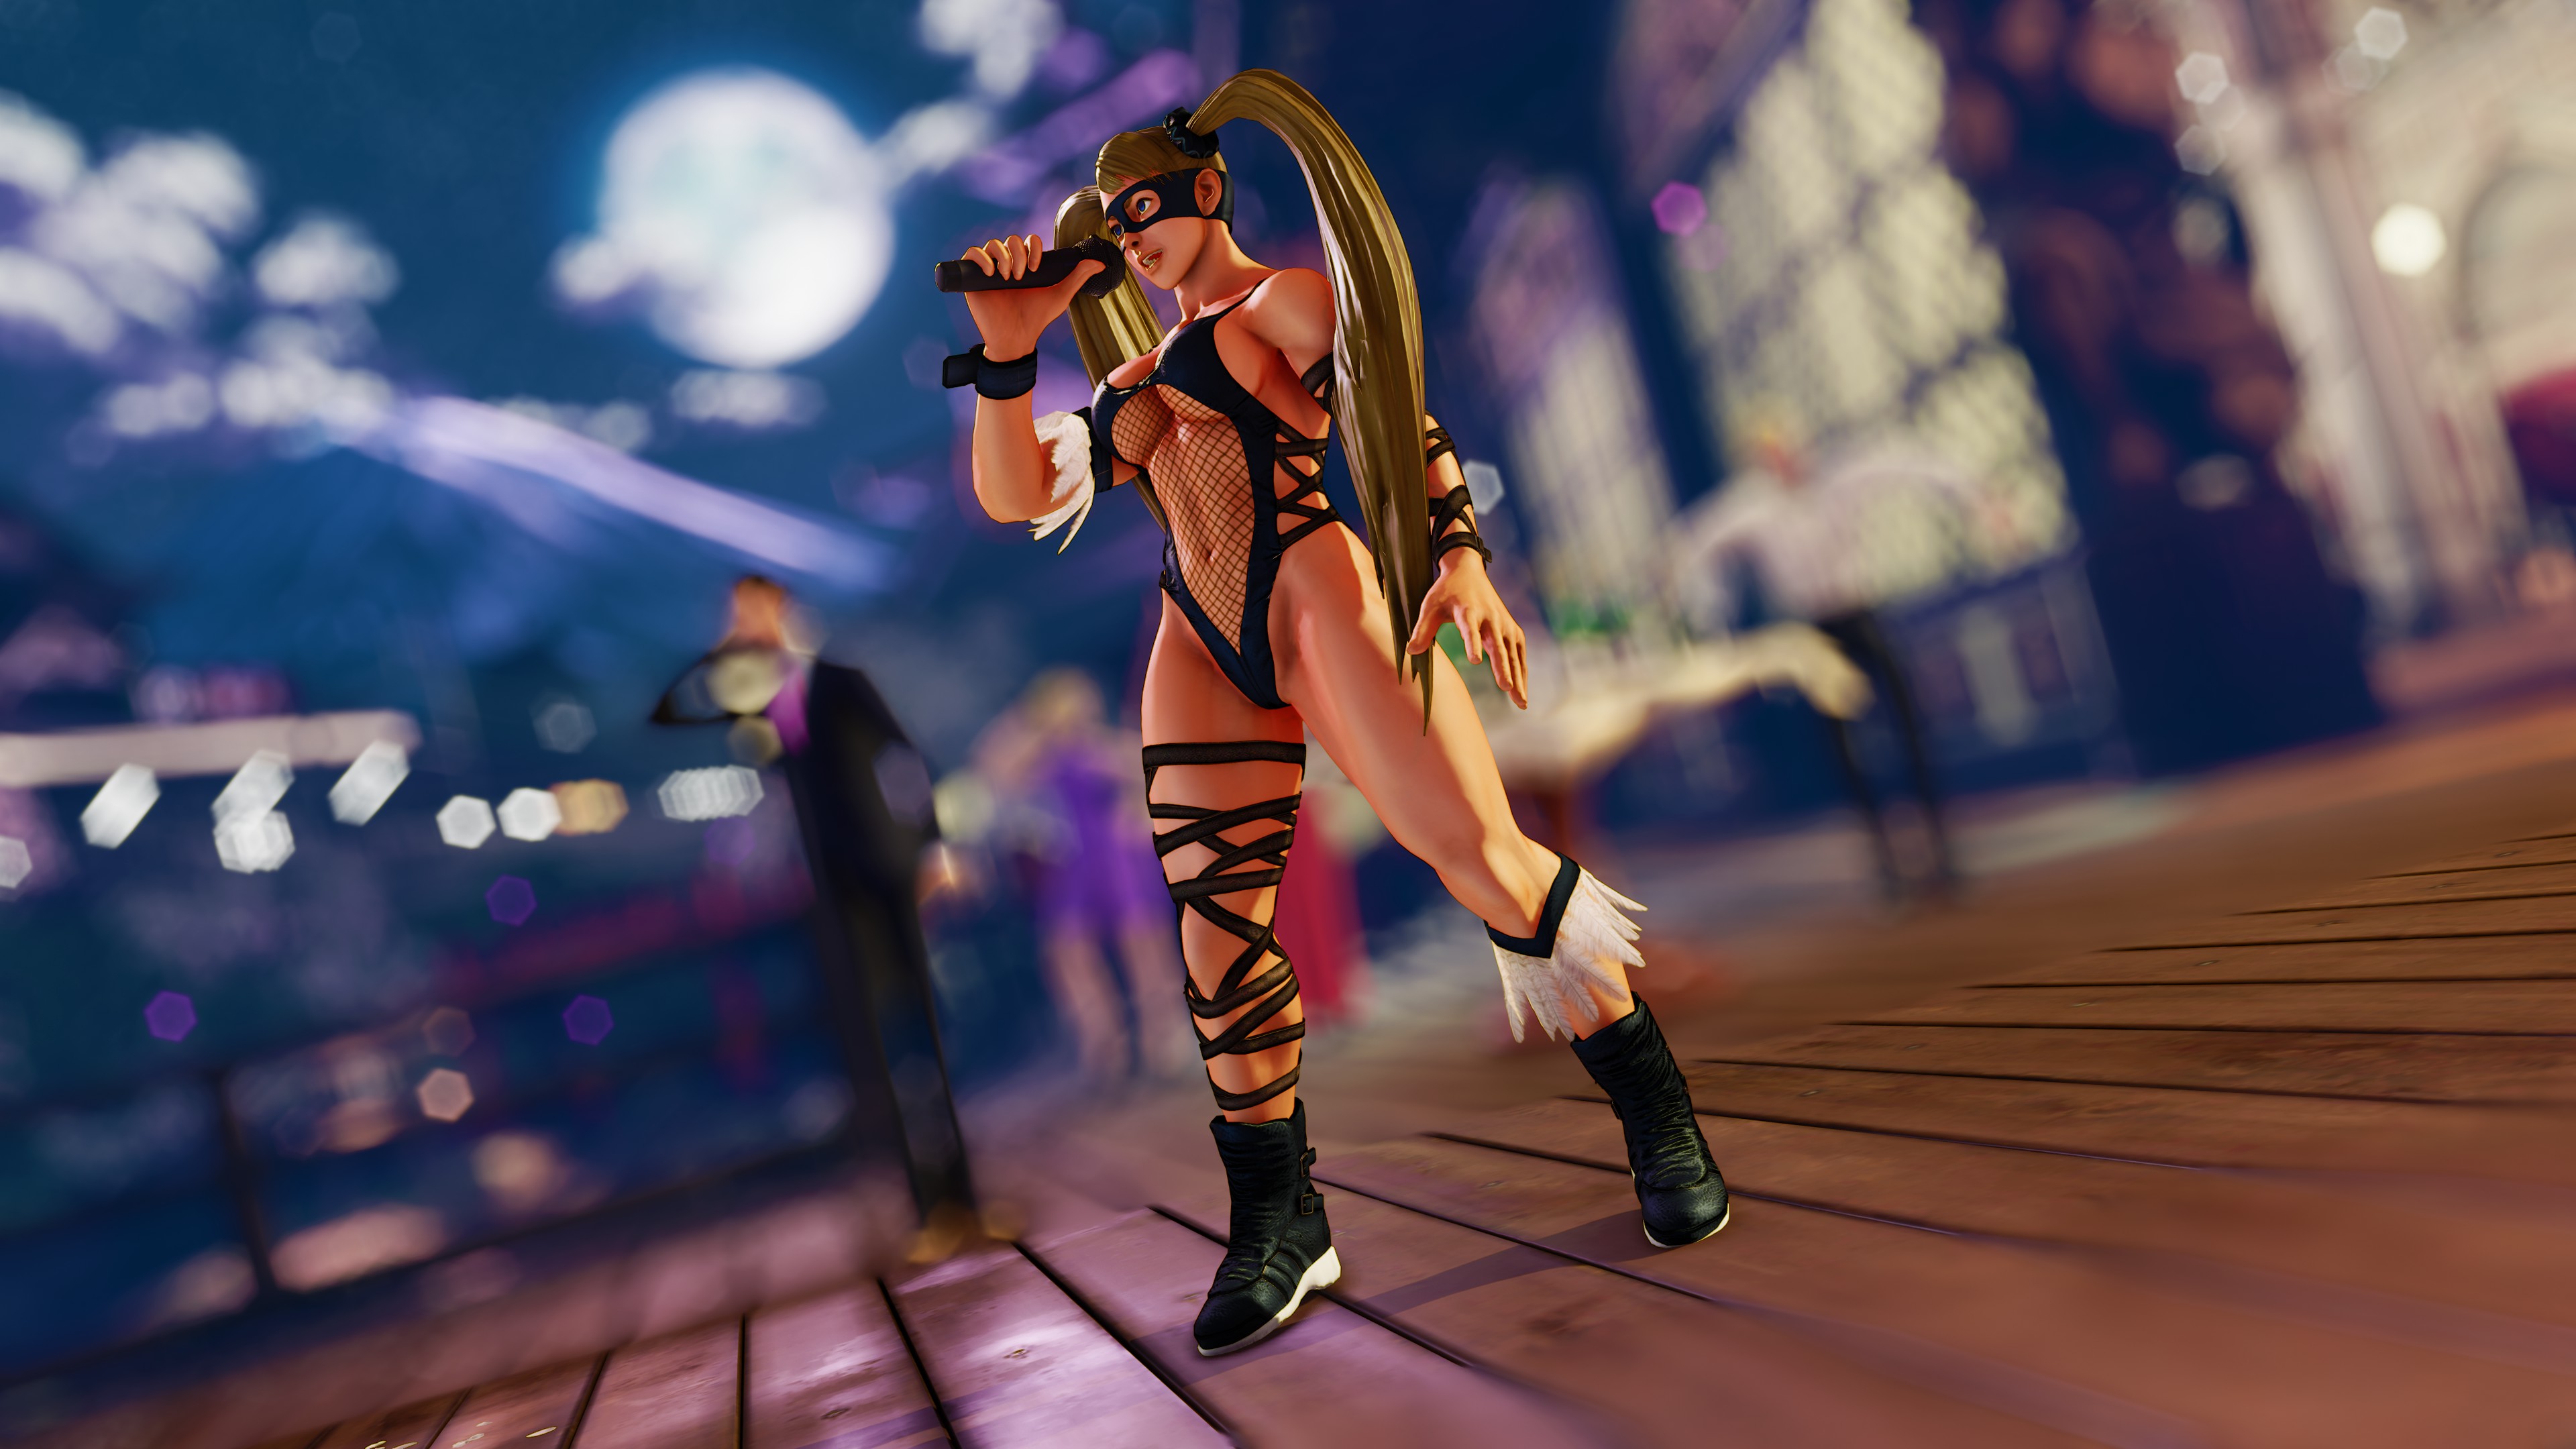 FORTNITE *THICC* STREETFIGHTER SKIN 'CAMMY' SHOWCASED WITH HOT